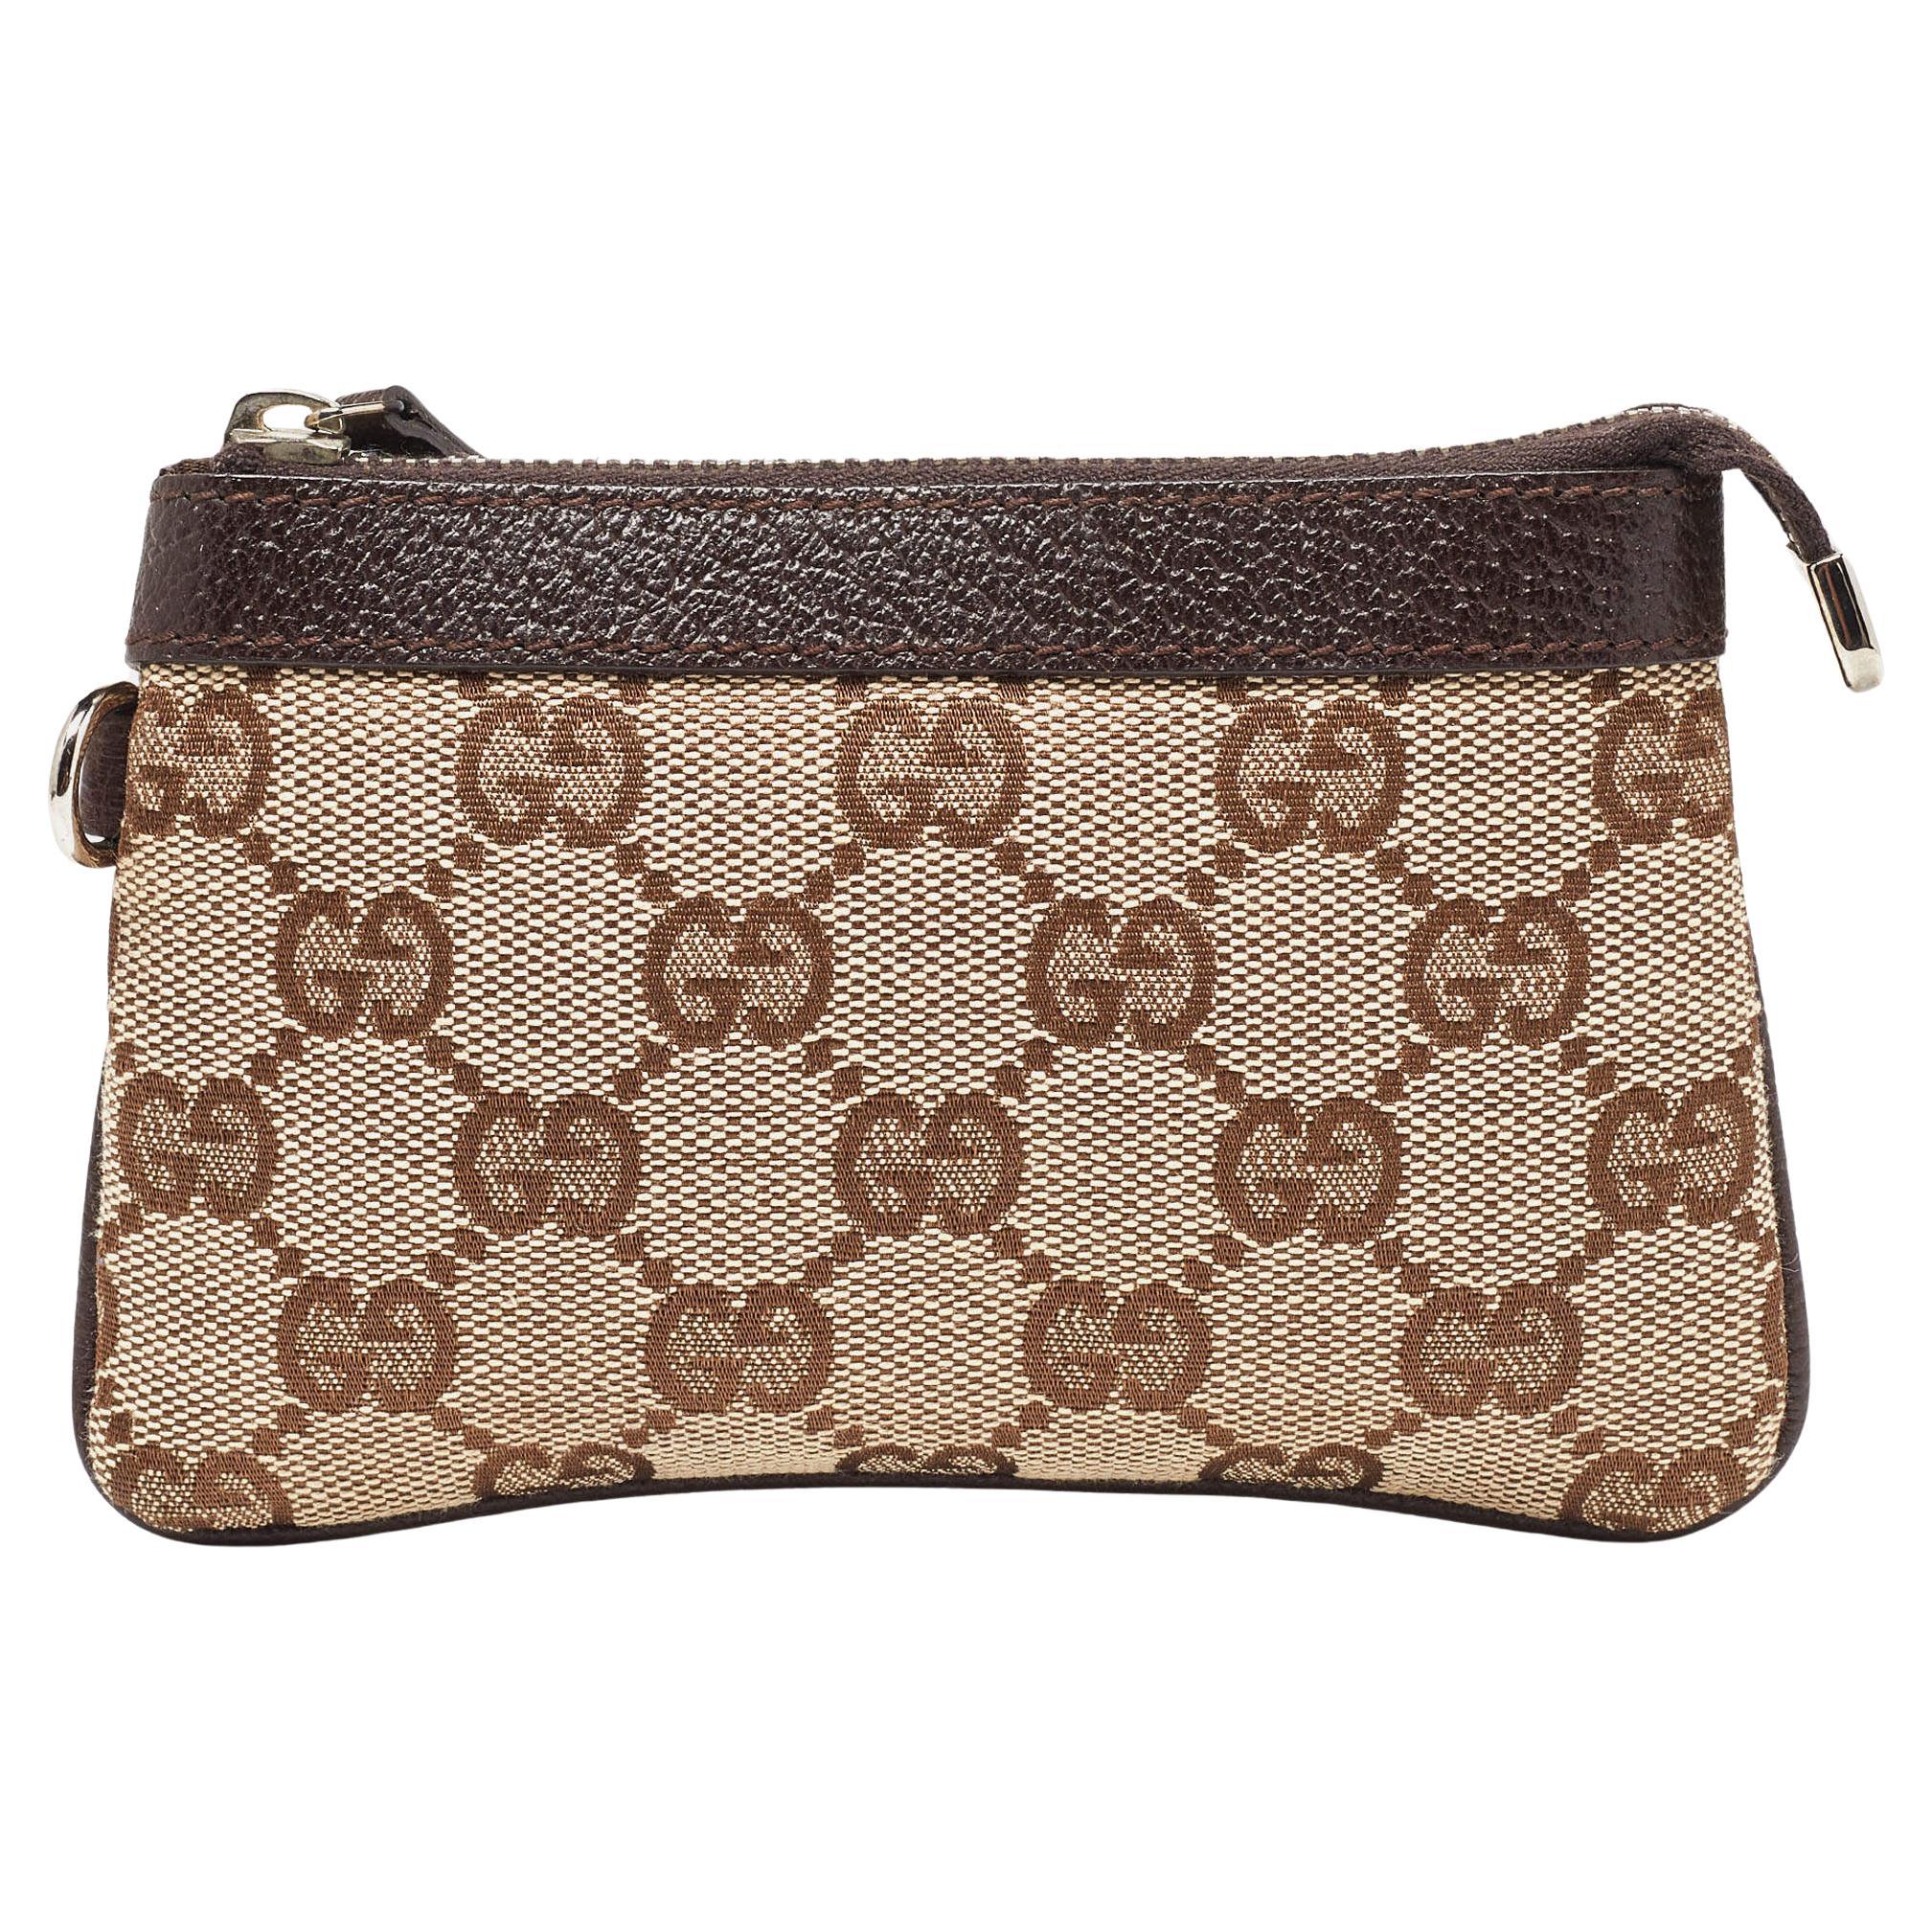 Gucci Beige/Brown GG Canvas and Leather Zip Pouch